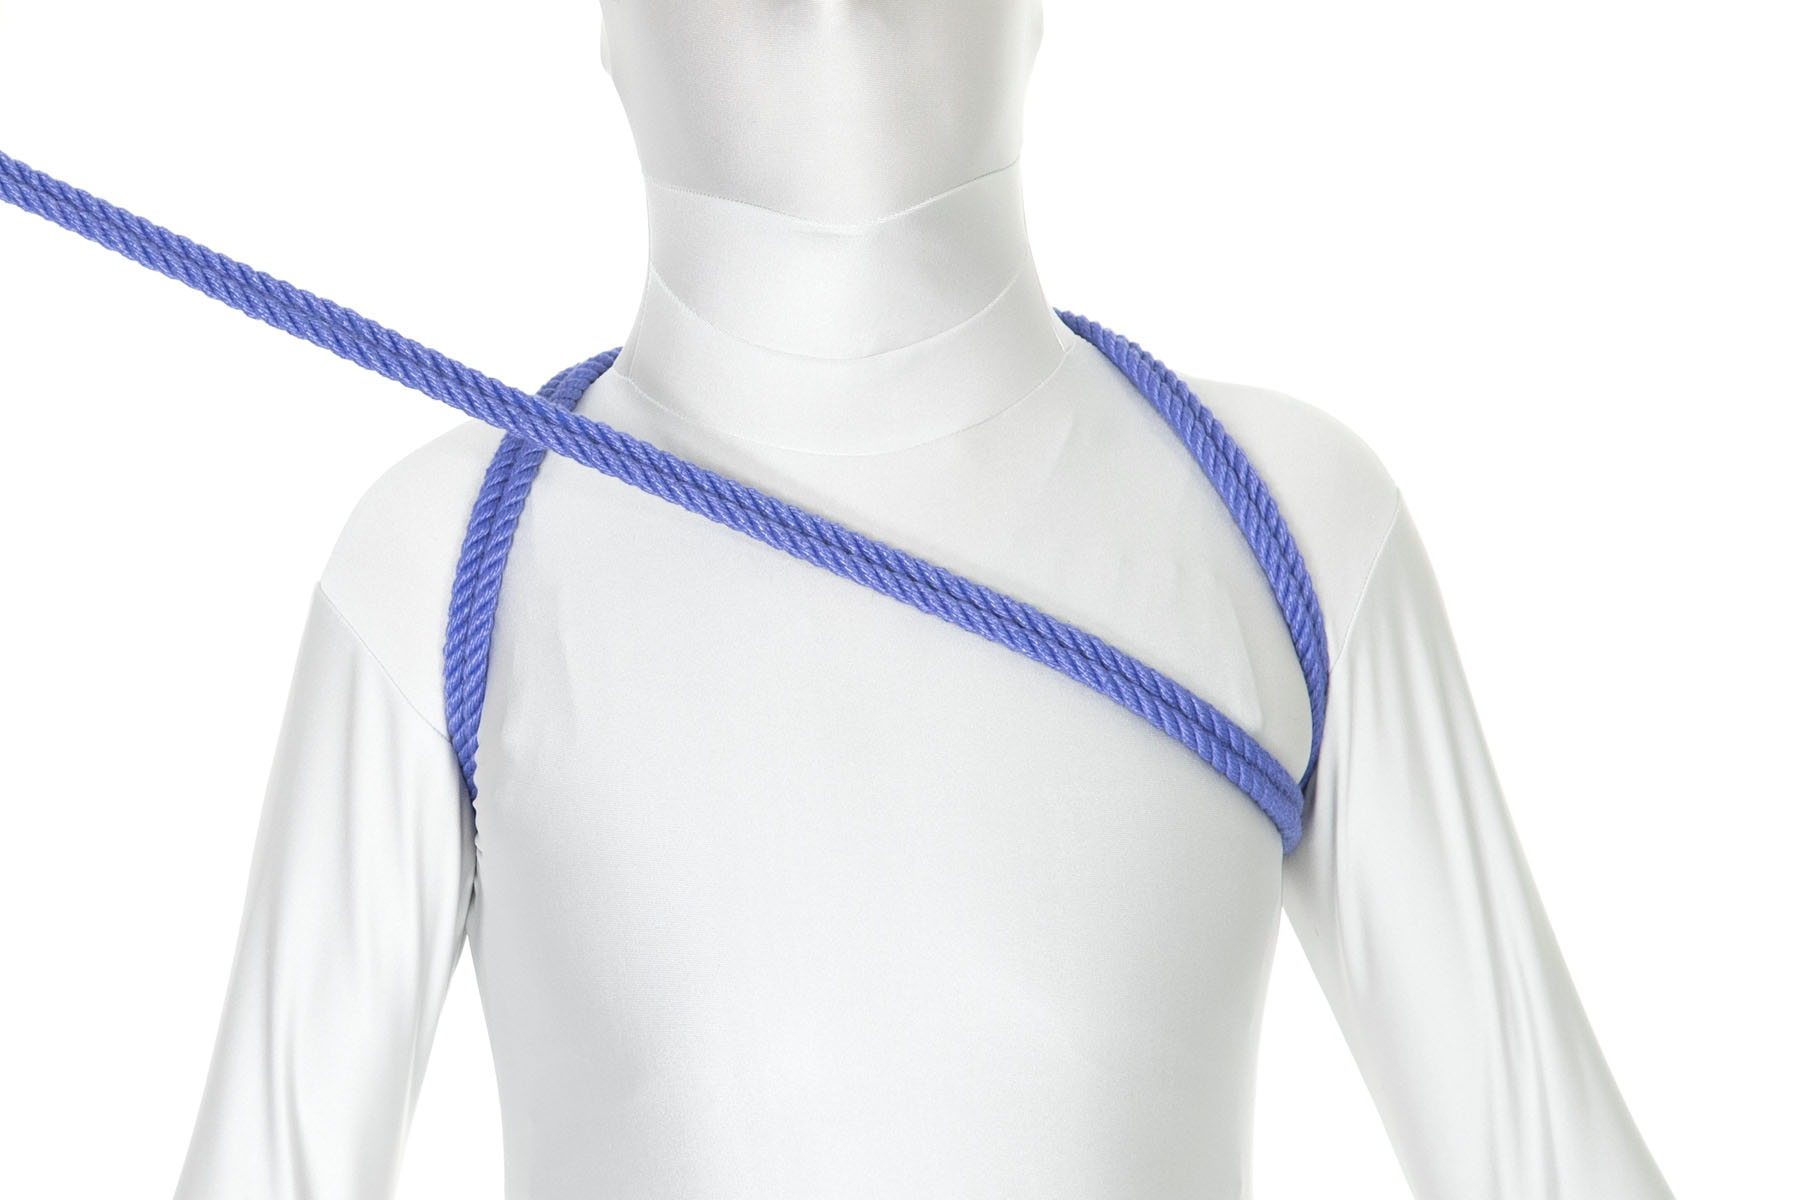 We are looking at the front of a person in a white bodysuit wearing a figure 8 shoulder harness. One blue rope comes up under their left armpit, up over the left shoulder, and vanishes behind the neck. Another rope does the same thing on the right side. A new rope has been added, coming from under the left shoulder and crossing diagonally up across the chest.